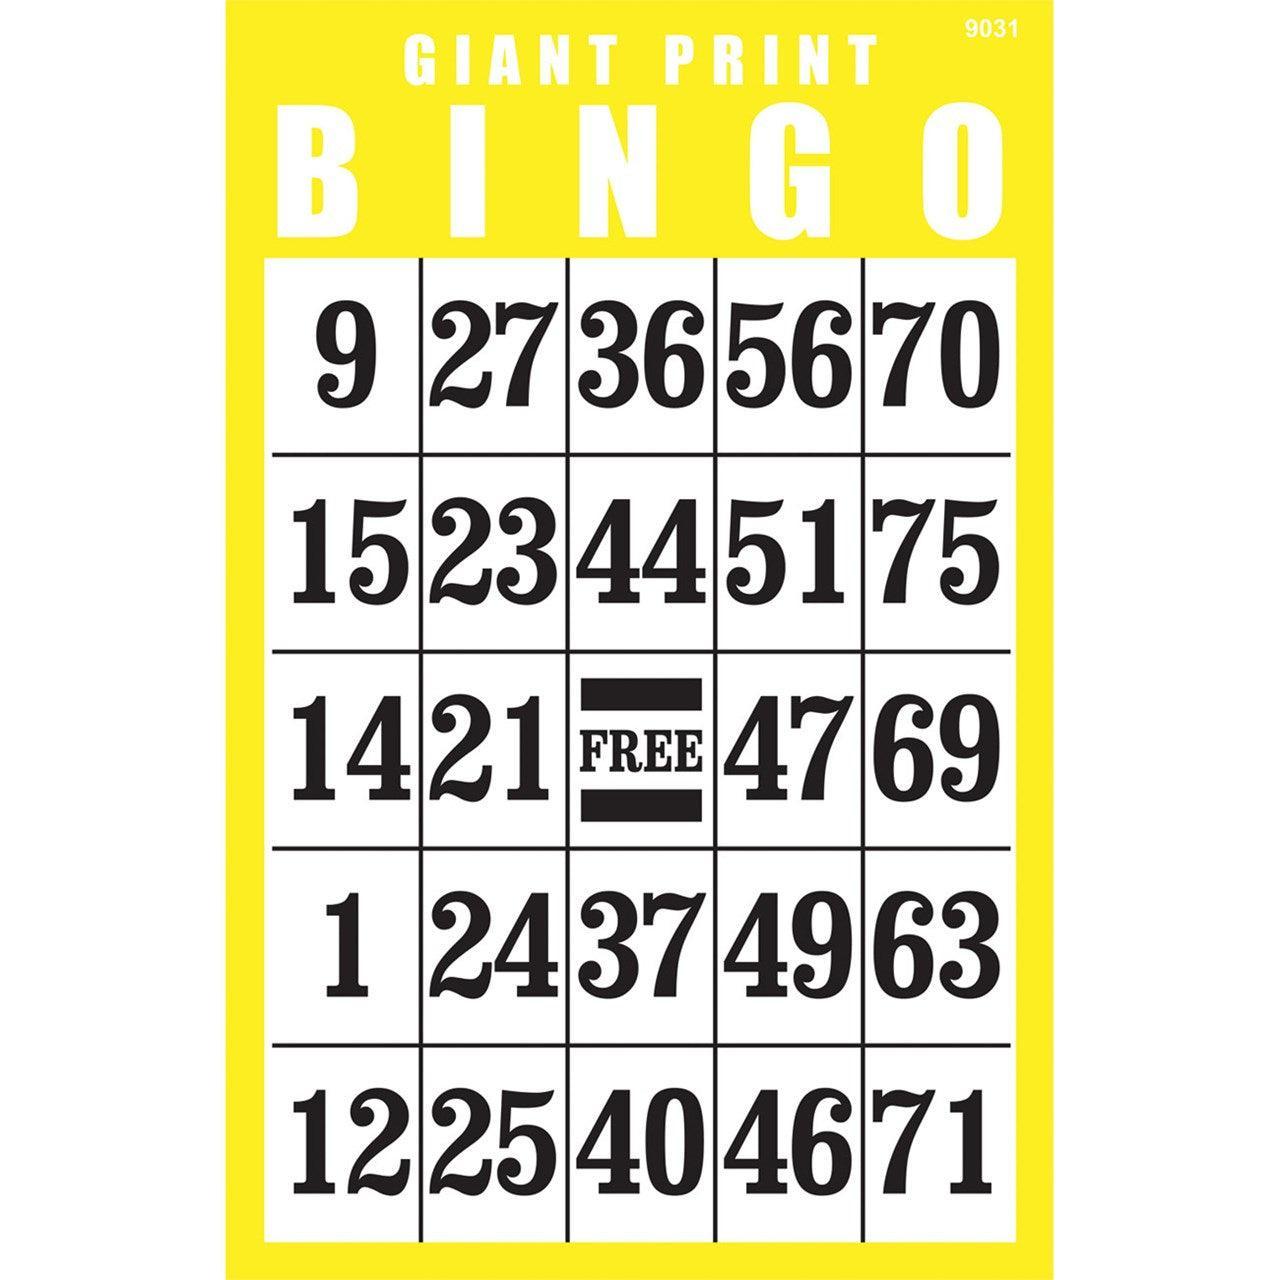 Giant Print Laminated Bingo Card - The Low Vision Store